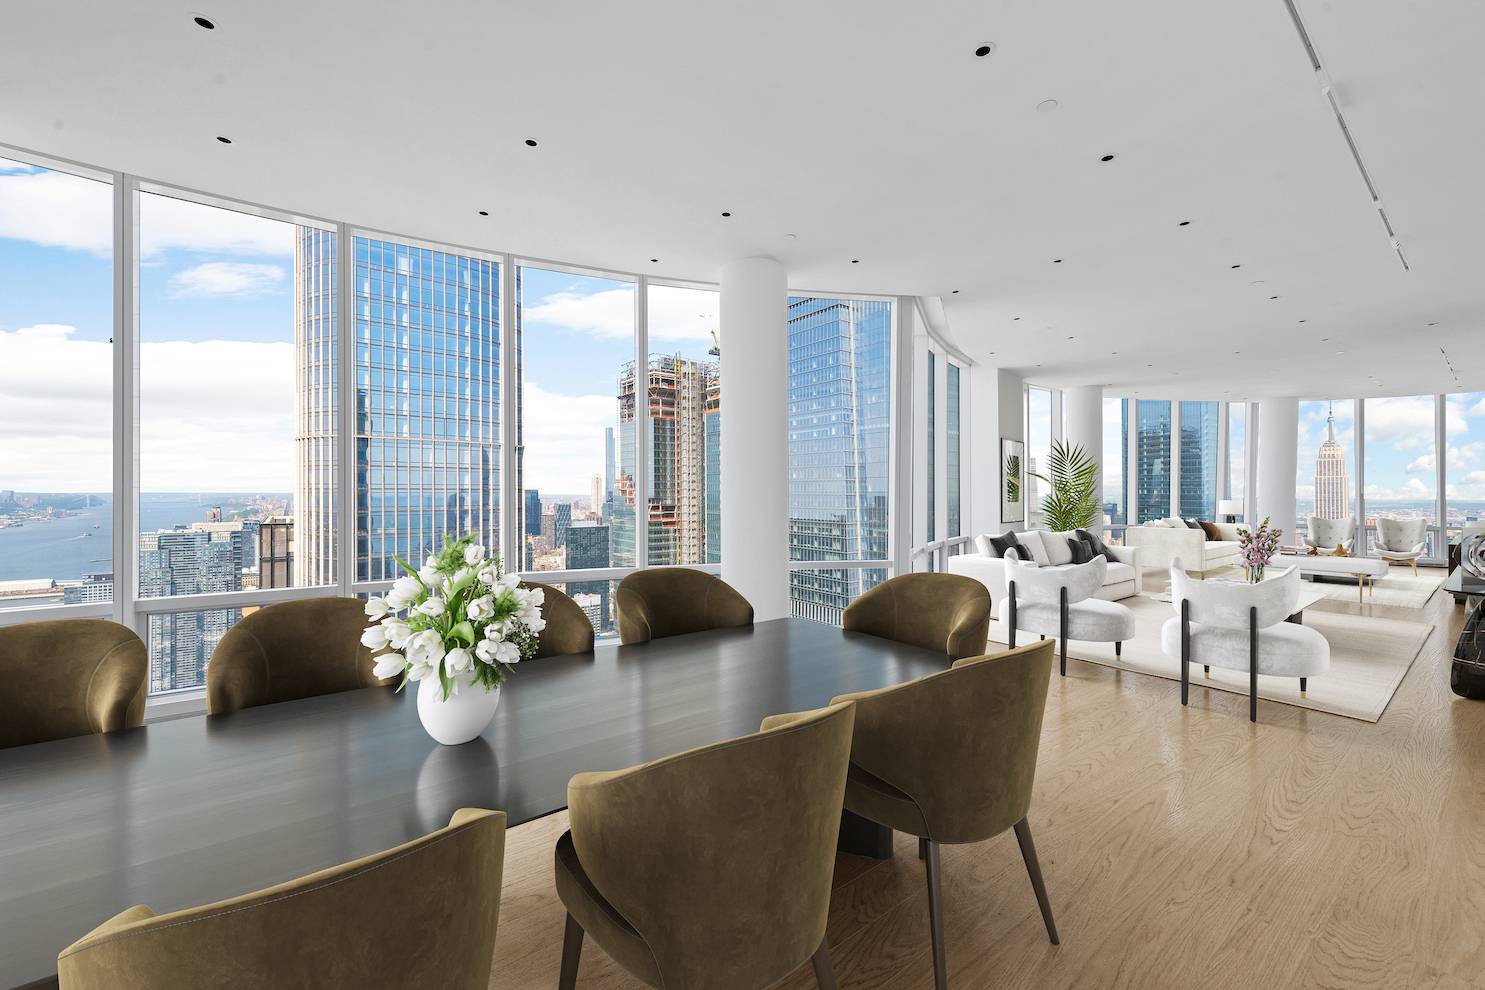 Introducing this never before lived in sky high home in the exclusive 15 Hudson Yards.